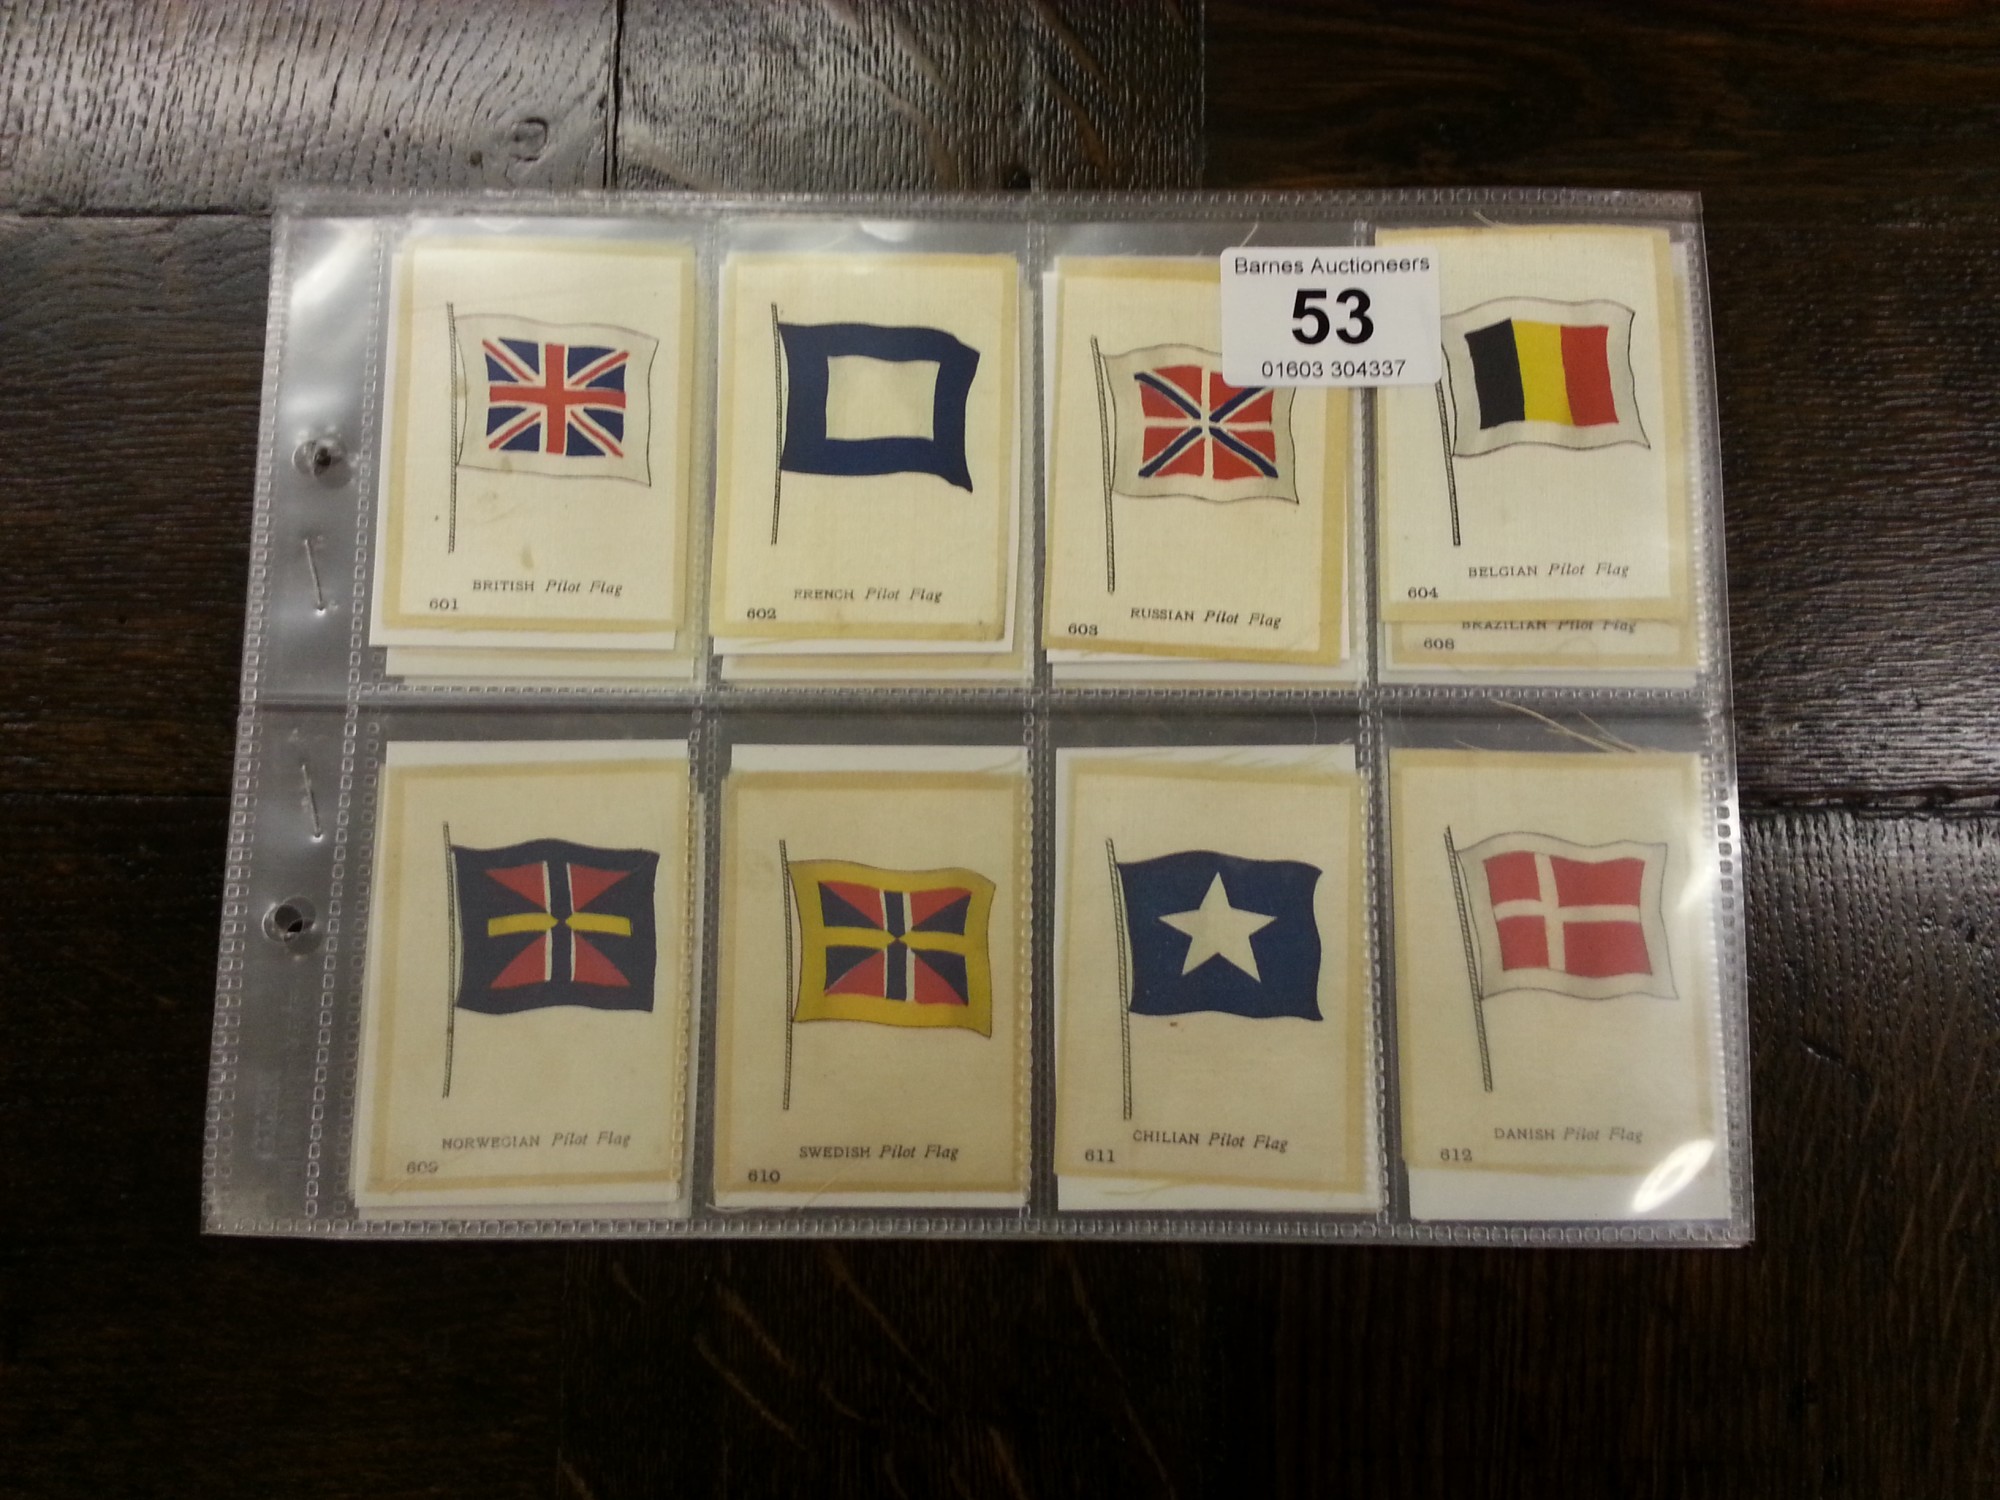 Set M25 Godfrey Phillips Pilot and Signal Flags (Anon), 1921